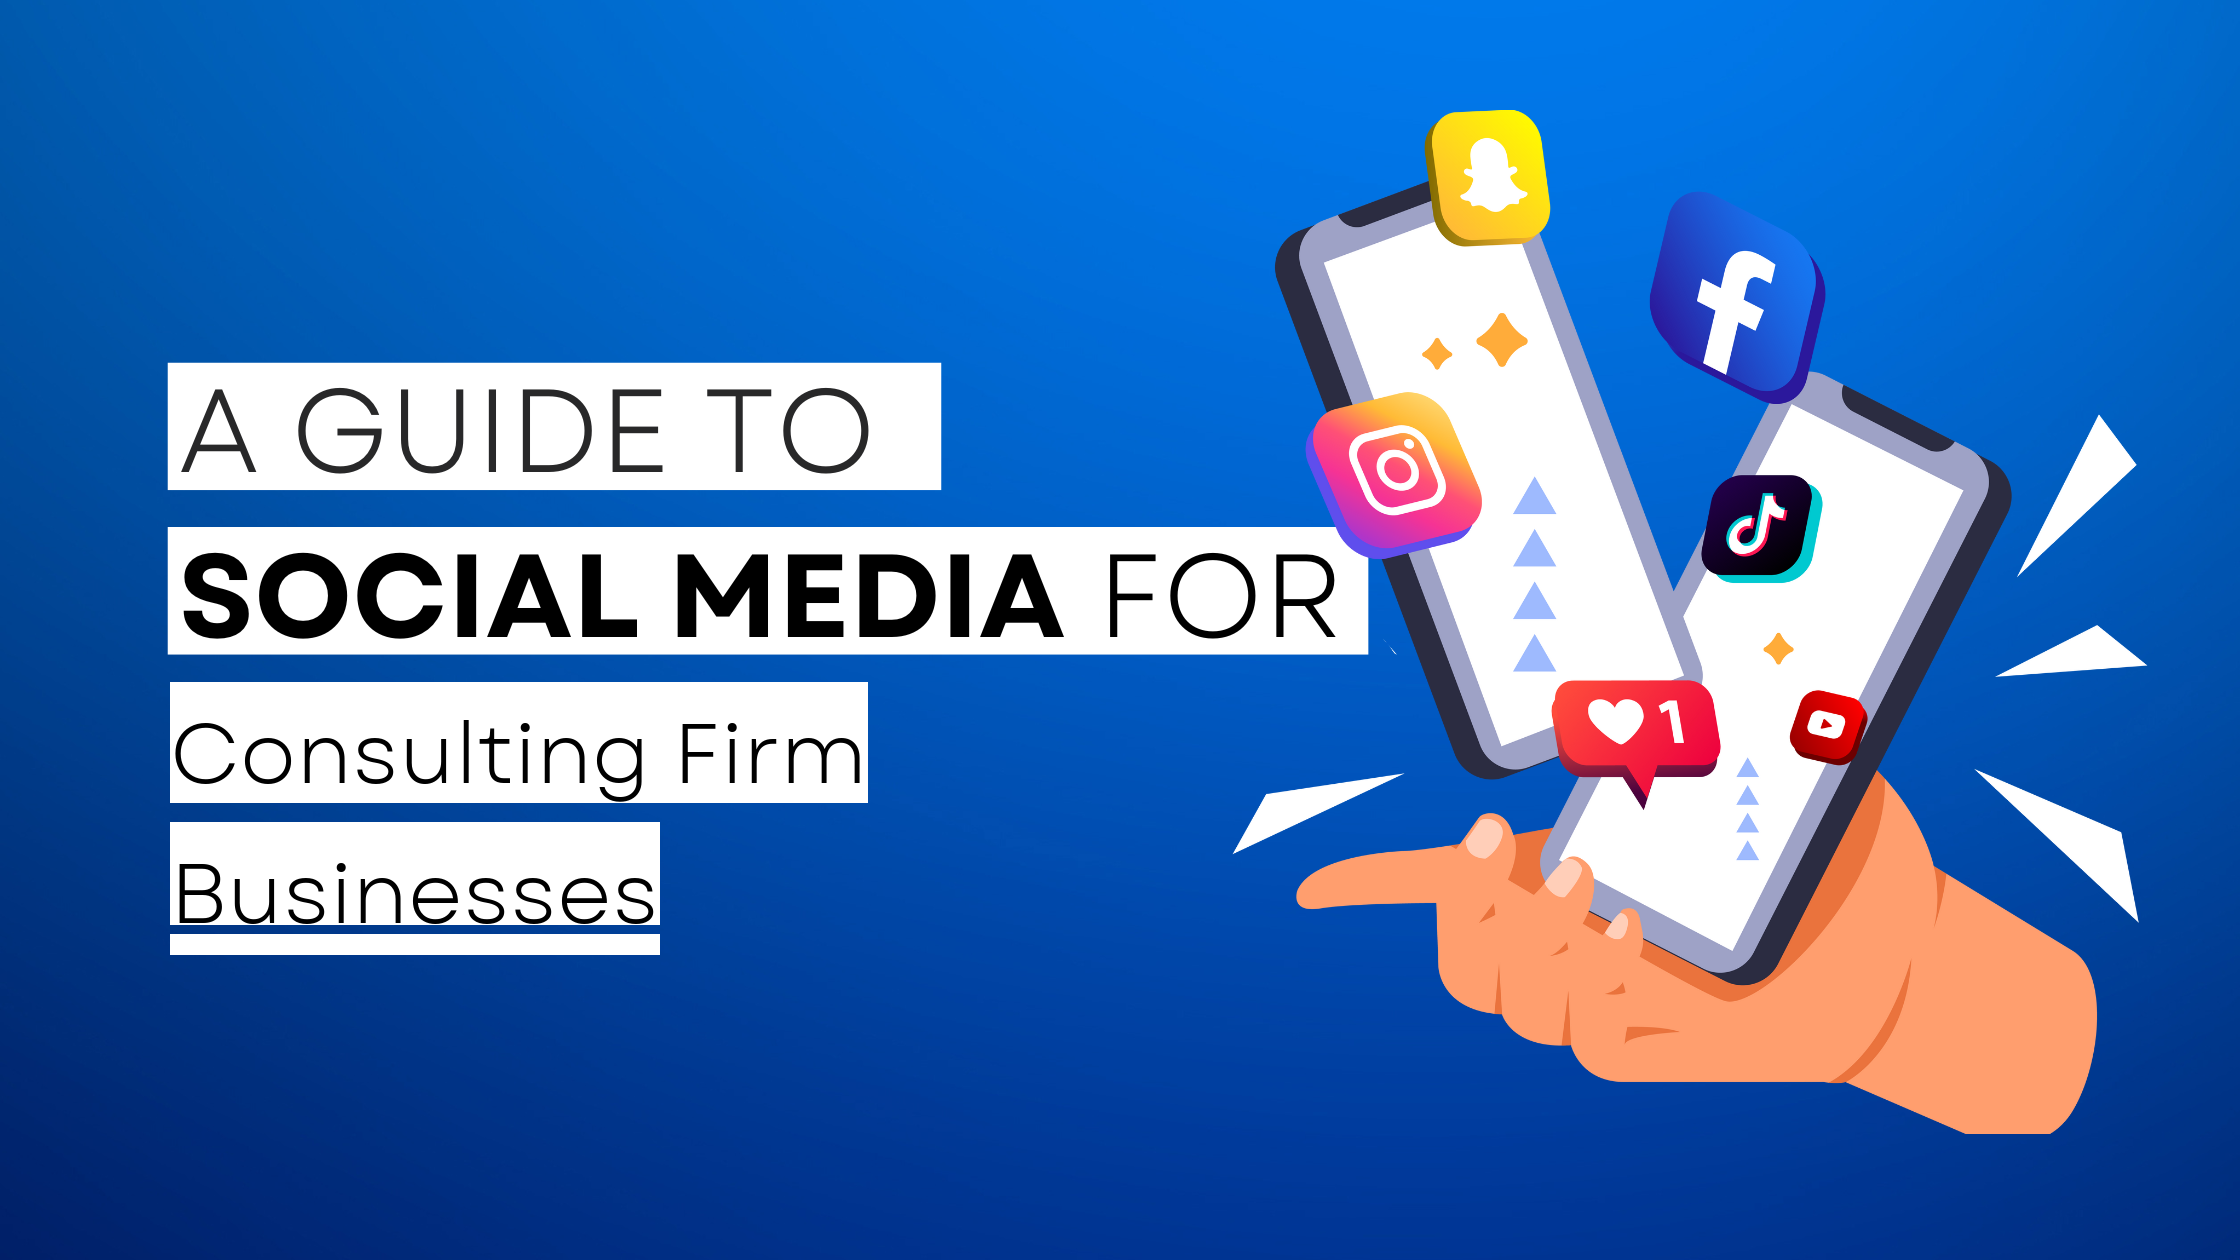 How to start Consulting Firm on social media